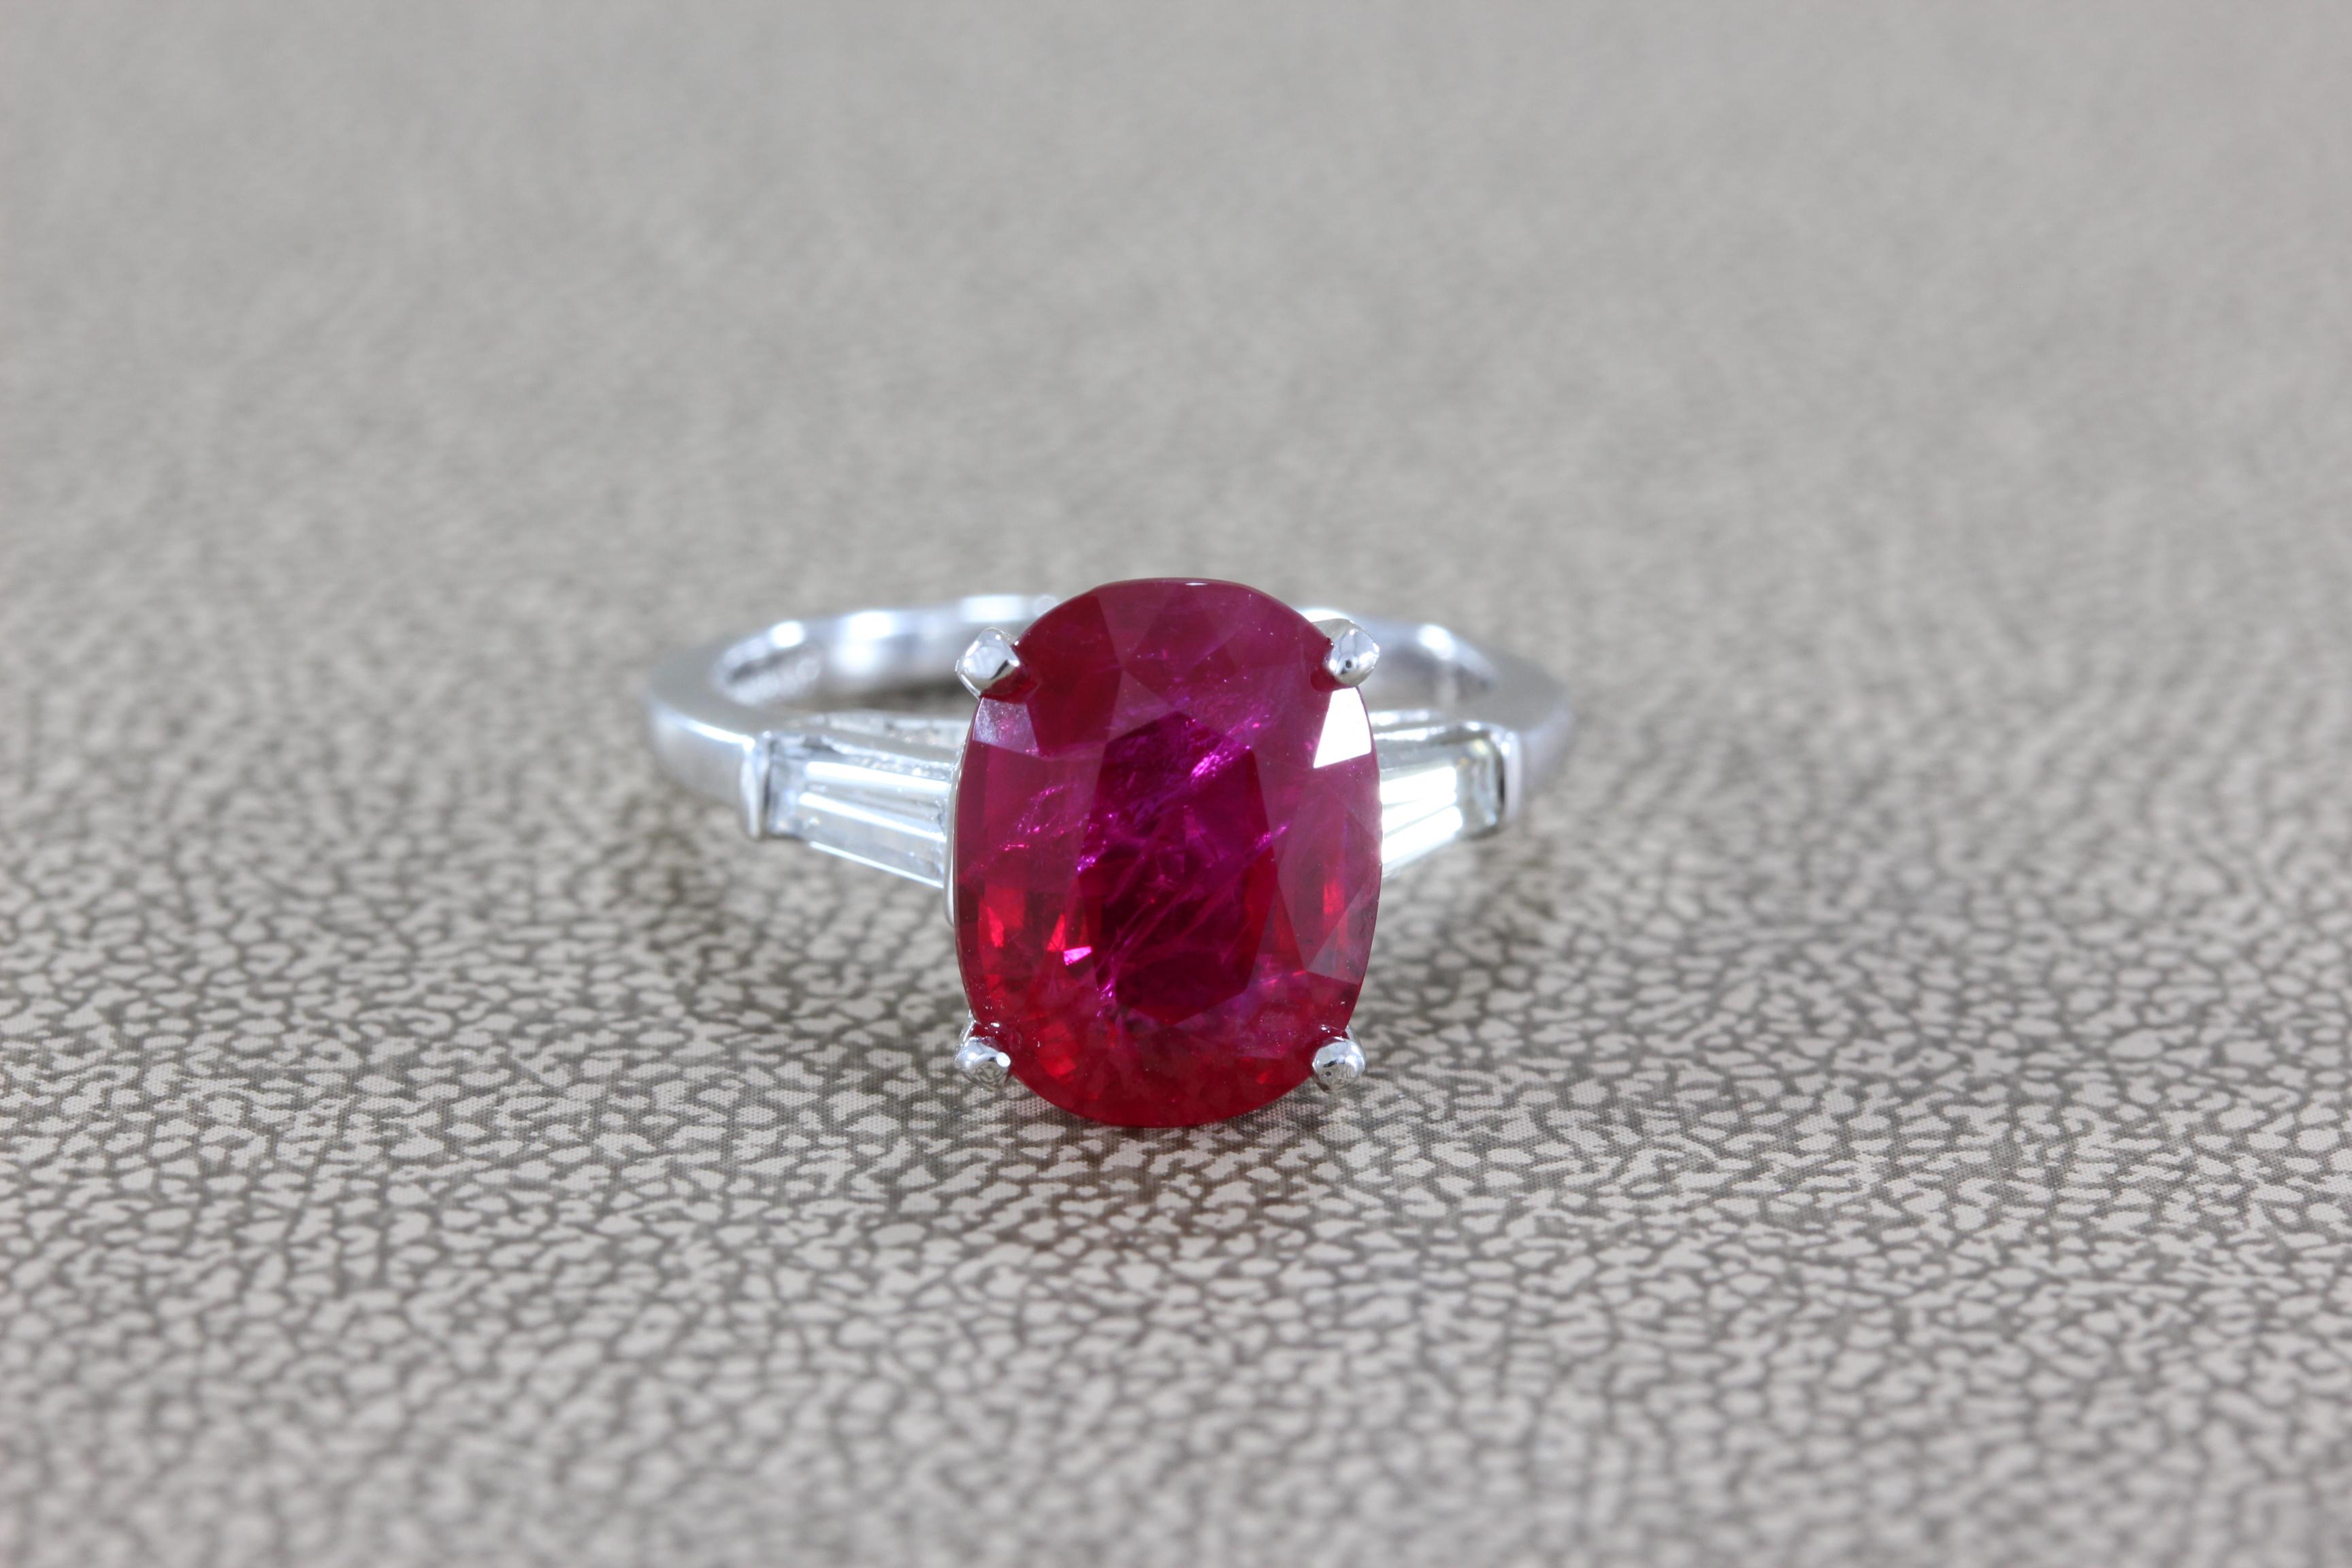 A magnificent ring featuring a GIA certified 4.31 carat gem highly saturated red ruby. Two baguette cut diamonds accent the center gemstone, set in platinum. 

GIA #1172771507 accompanies the ring.  
Size 5.50 (Sizable)